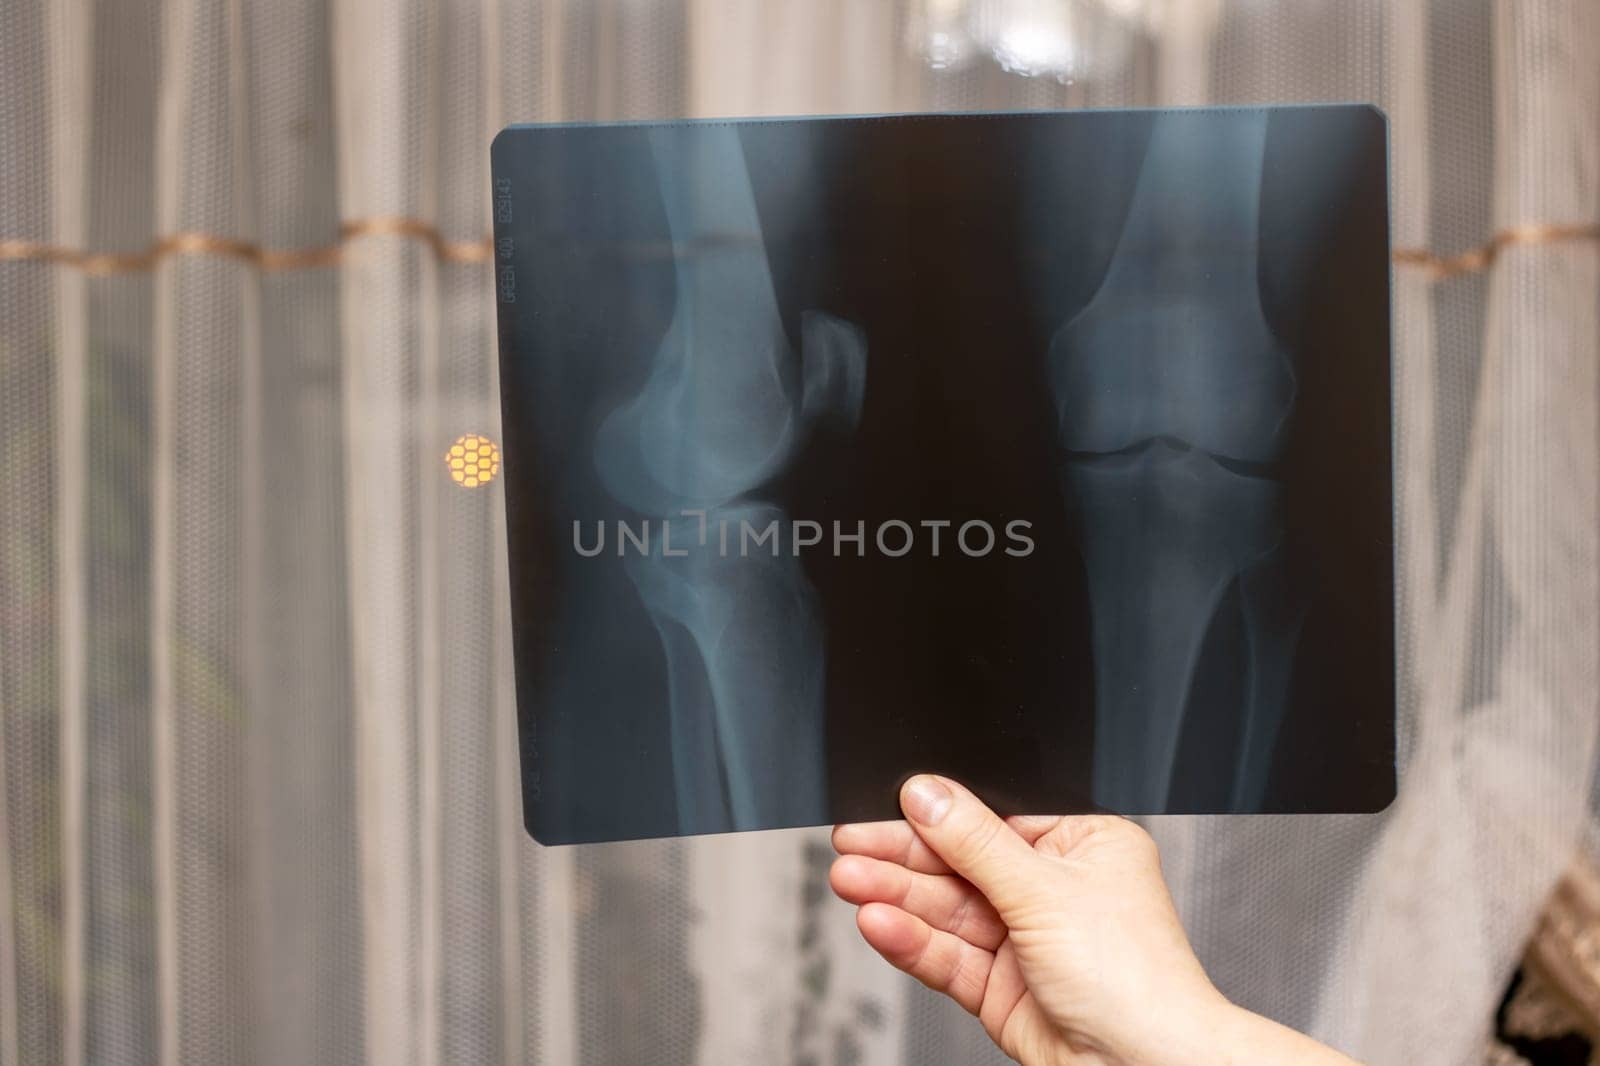 A person is holding an xray of their pelvis, examining the intricate tints and shades in the electric blue hues, creating a captivating visual arts gesture